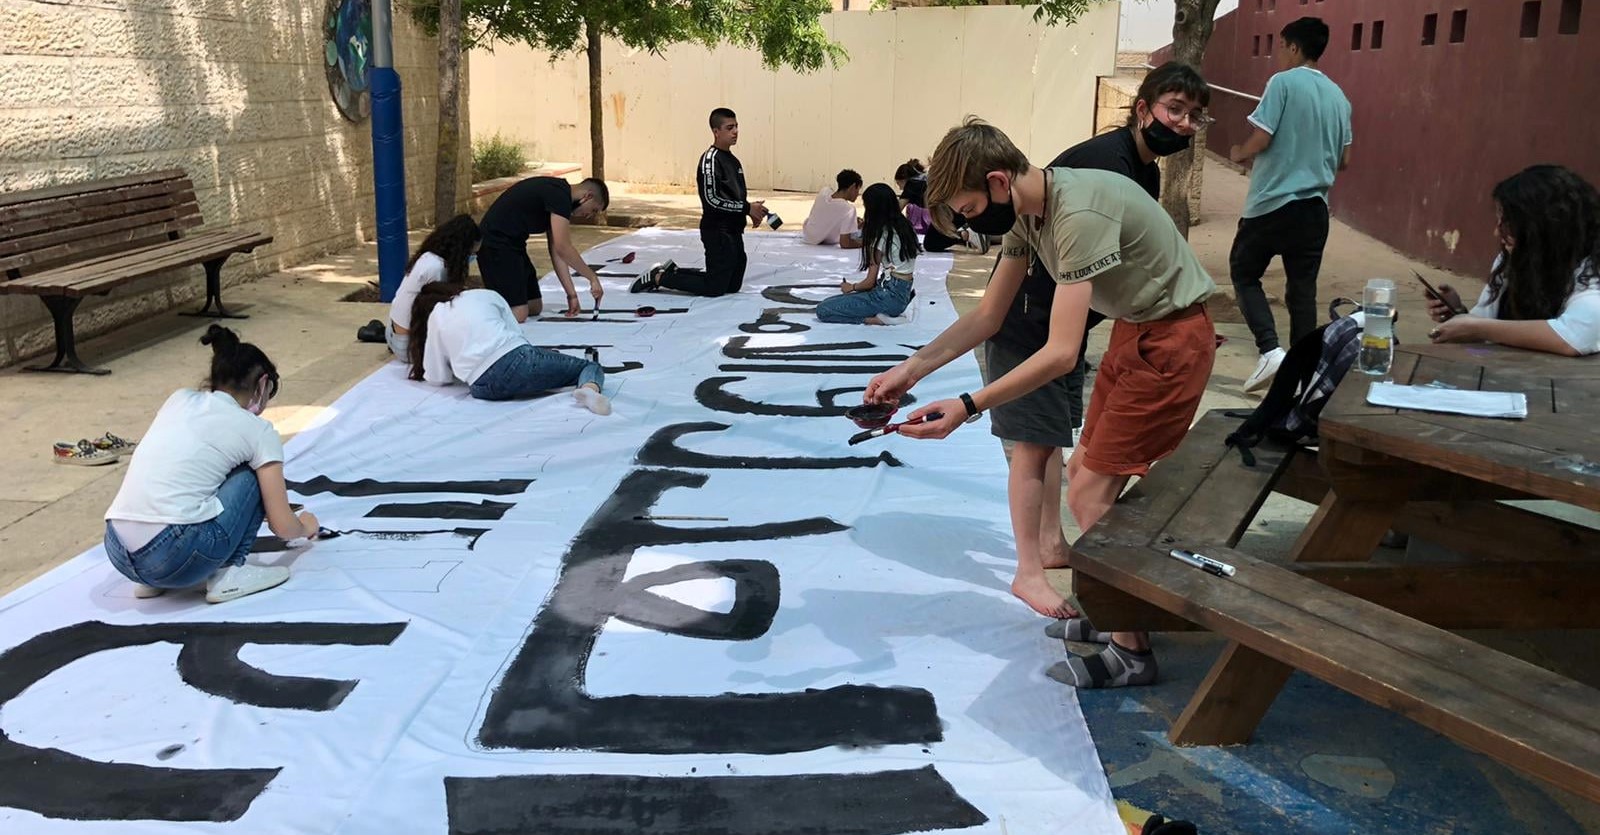 Preparing for a mass demonstration for Jewish-Arab solidarity and coexistence, pupils from the Yad b’Yad school in Jerusalem paint a huge banner in Hebrew and Arabic: "Equality and security for all Jerusalem residents."